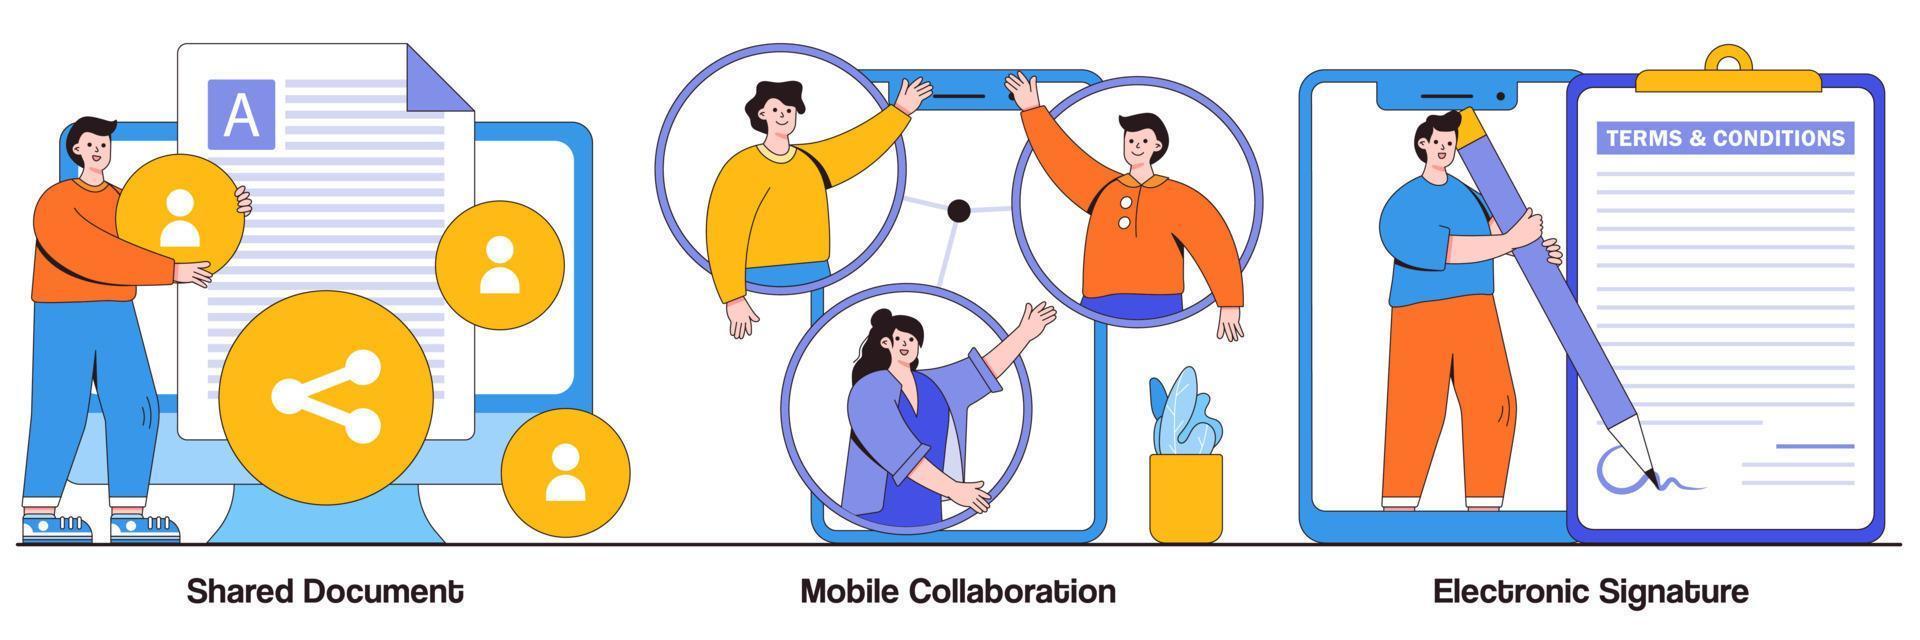 Shared document, mobile collaboration, electronic signature concept with people character. Digital documentation vector illustration set. Remote colleagues connection, contract signing metaphor